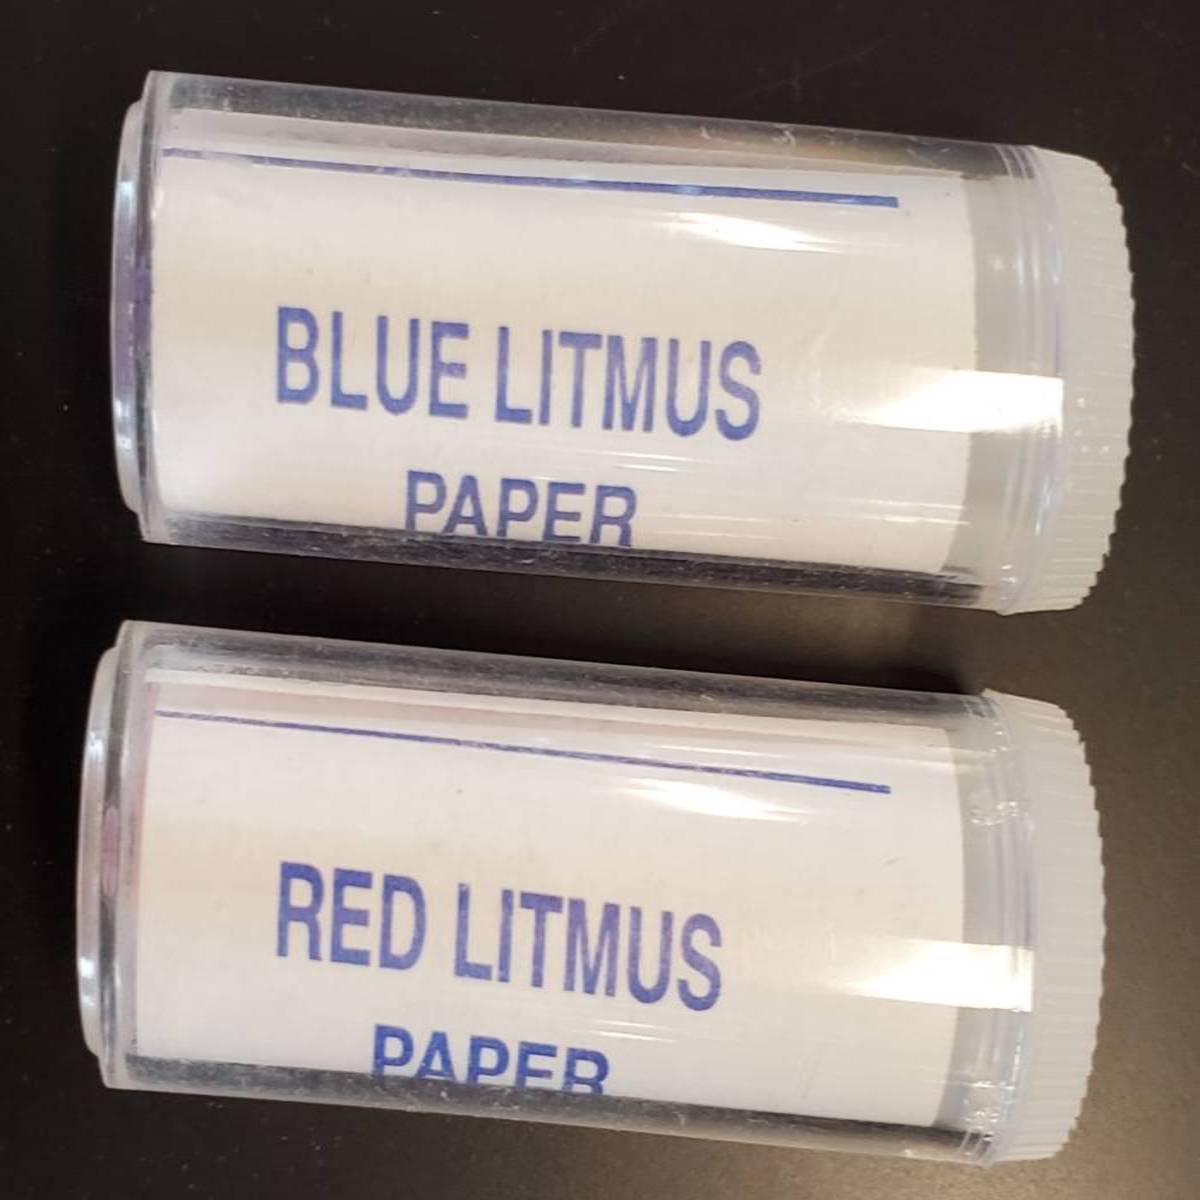 Picture of plastic vials containing red and blue litmus paper